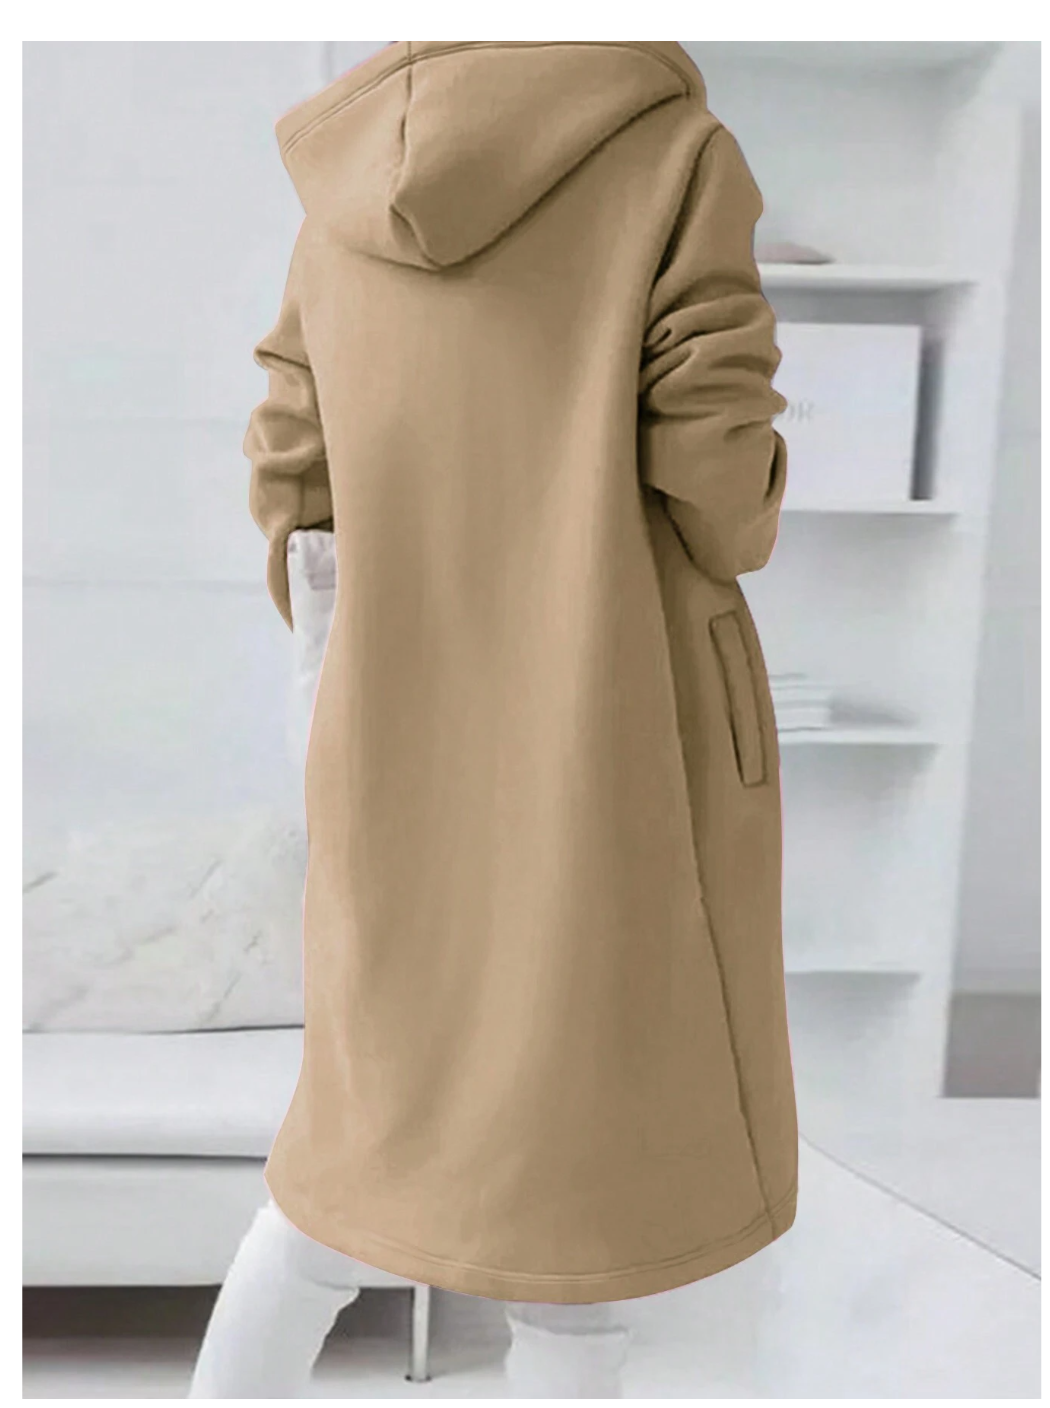 Elevate Your Everyday: Women's Chic Mid-length Hooded Casual Jacket for Effortless Workwear in Autumn/Winter!